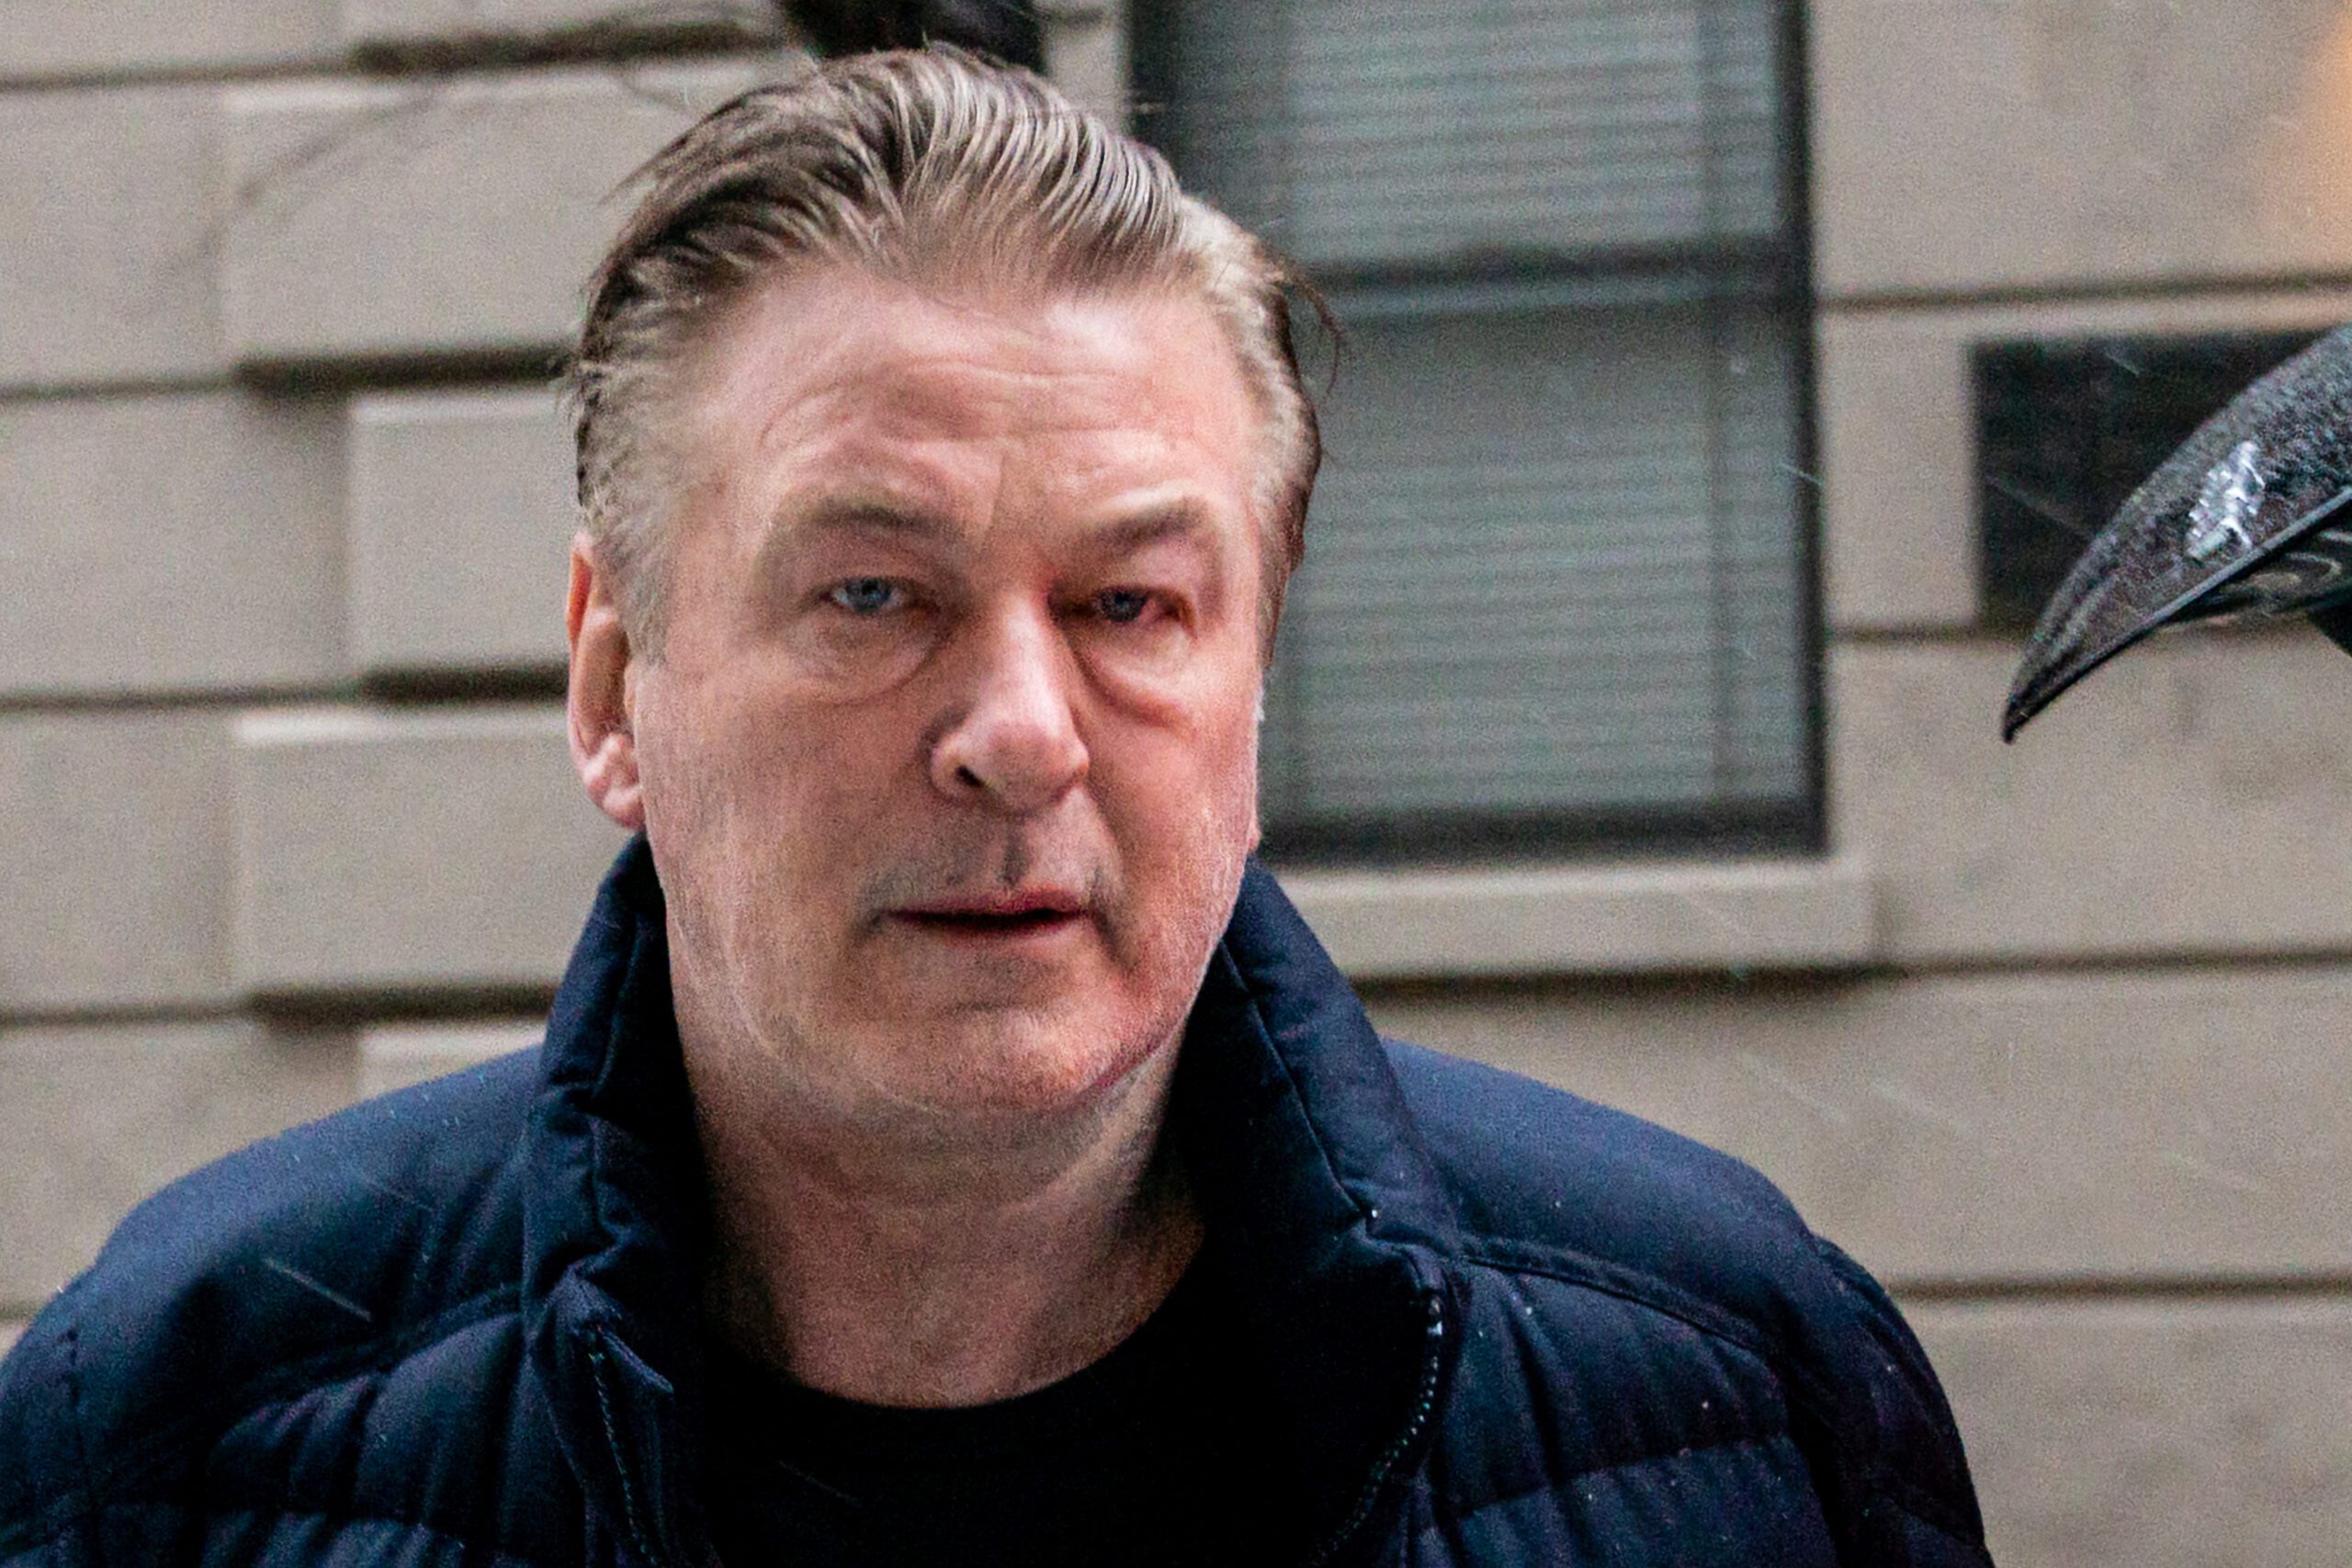 Parents of late cinematographer Halyna Hutchins sue Alec Baldwin over ‘Rust’ shooting